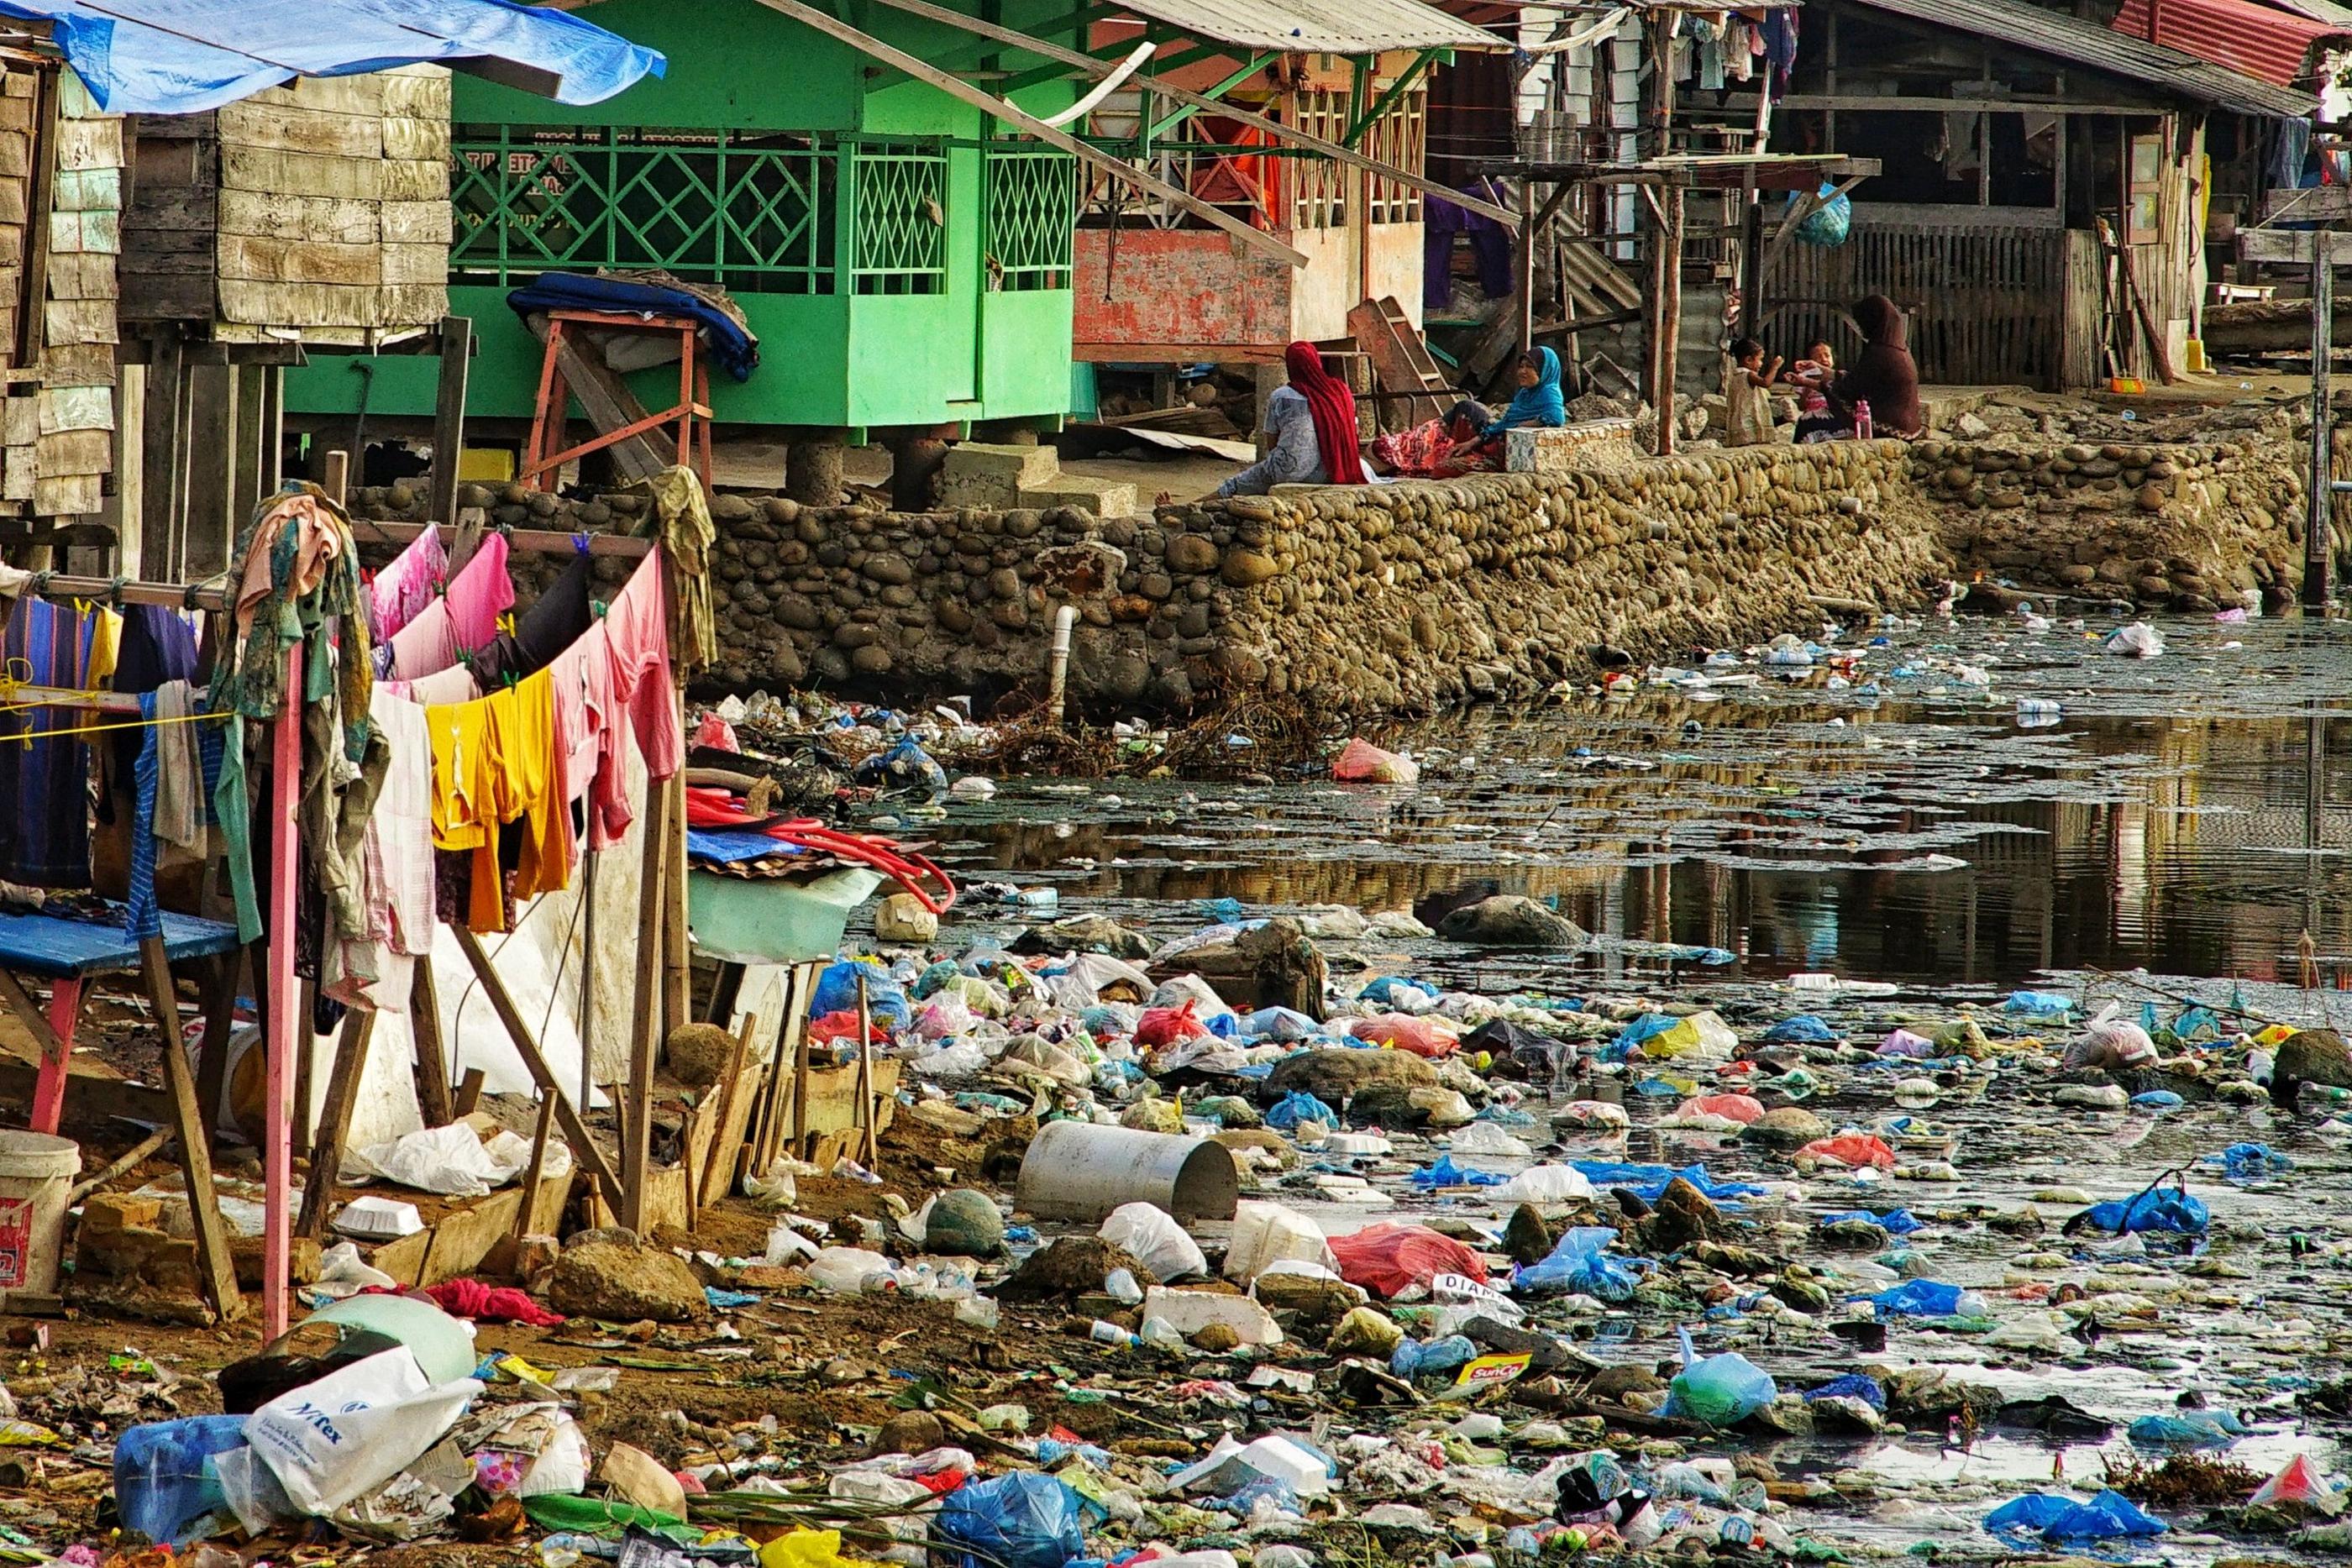 (FILES) This picture shows rubbish washed ashore next to homes beside a river mouth at a coastal village in Lhokseumawe, Indonesia's Aceh province on June 3, 2021. Negotiations on a global treaty to combat plastic pollution will resume on May 29, 2023, with nations under pressure to stem the tide of trash amid calls from campaigners to limit industry influence on the talks. Some 175 nations pledged last year to agree by 2024 a binding deal to end the pollution from largely fossil fuel-based plastics that is choking the environment and infiltrating the bodies of humans and animals. The May 29-June 2 talks in Paris are tasked with agreeing the first outline for actions that could form the basis of a draft negotiating text. (Photo by Azwar Ipank / AFP) / TO GO WITH Pakistan-environment-plastic,FEATURE by Joris Fioriti